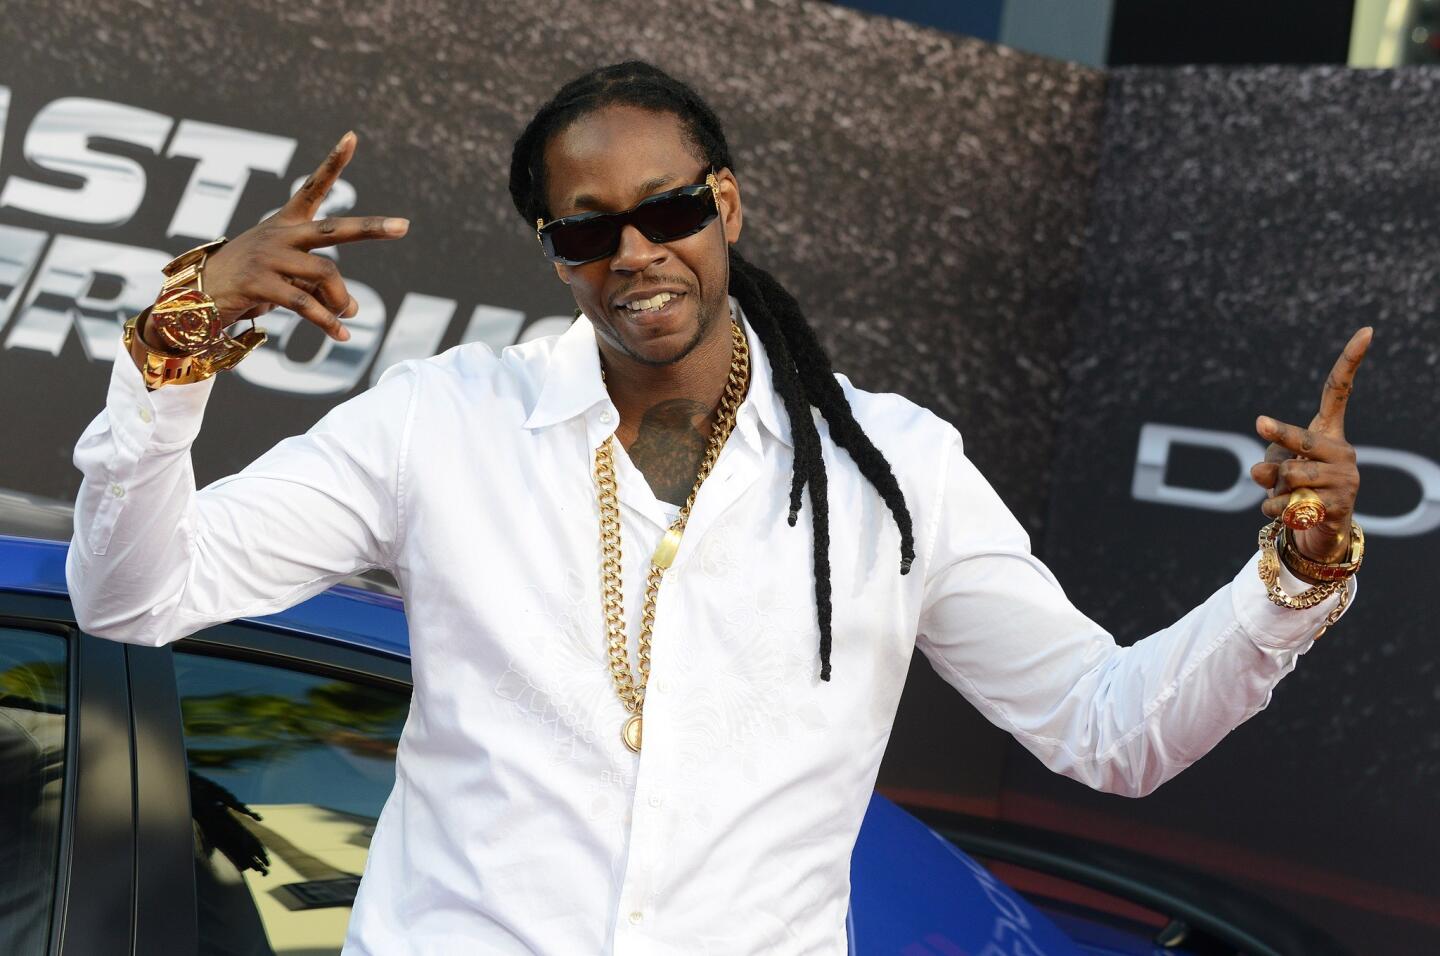 2 Chainz arrested at LAX